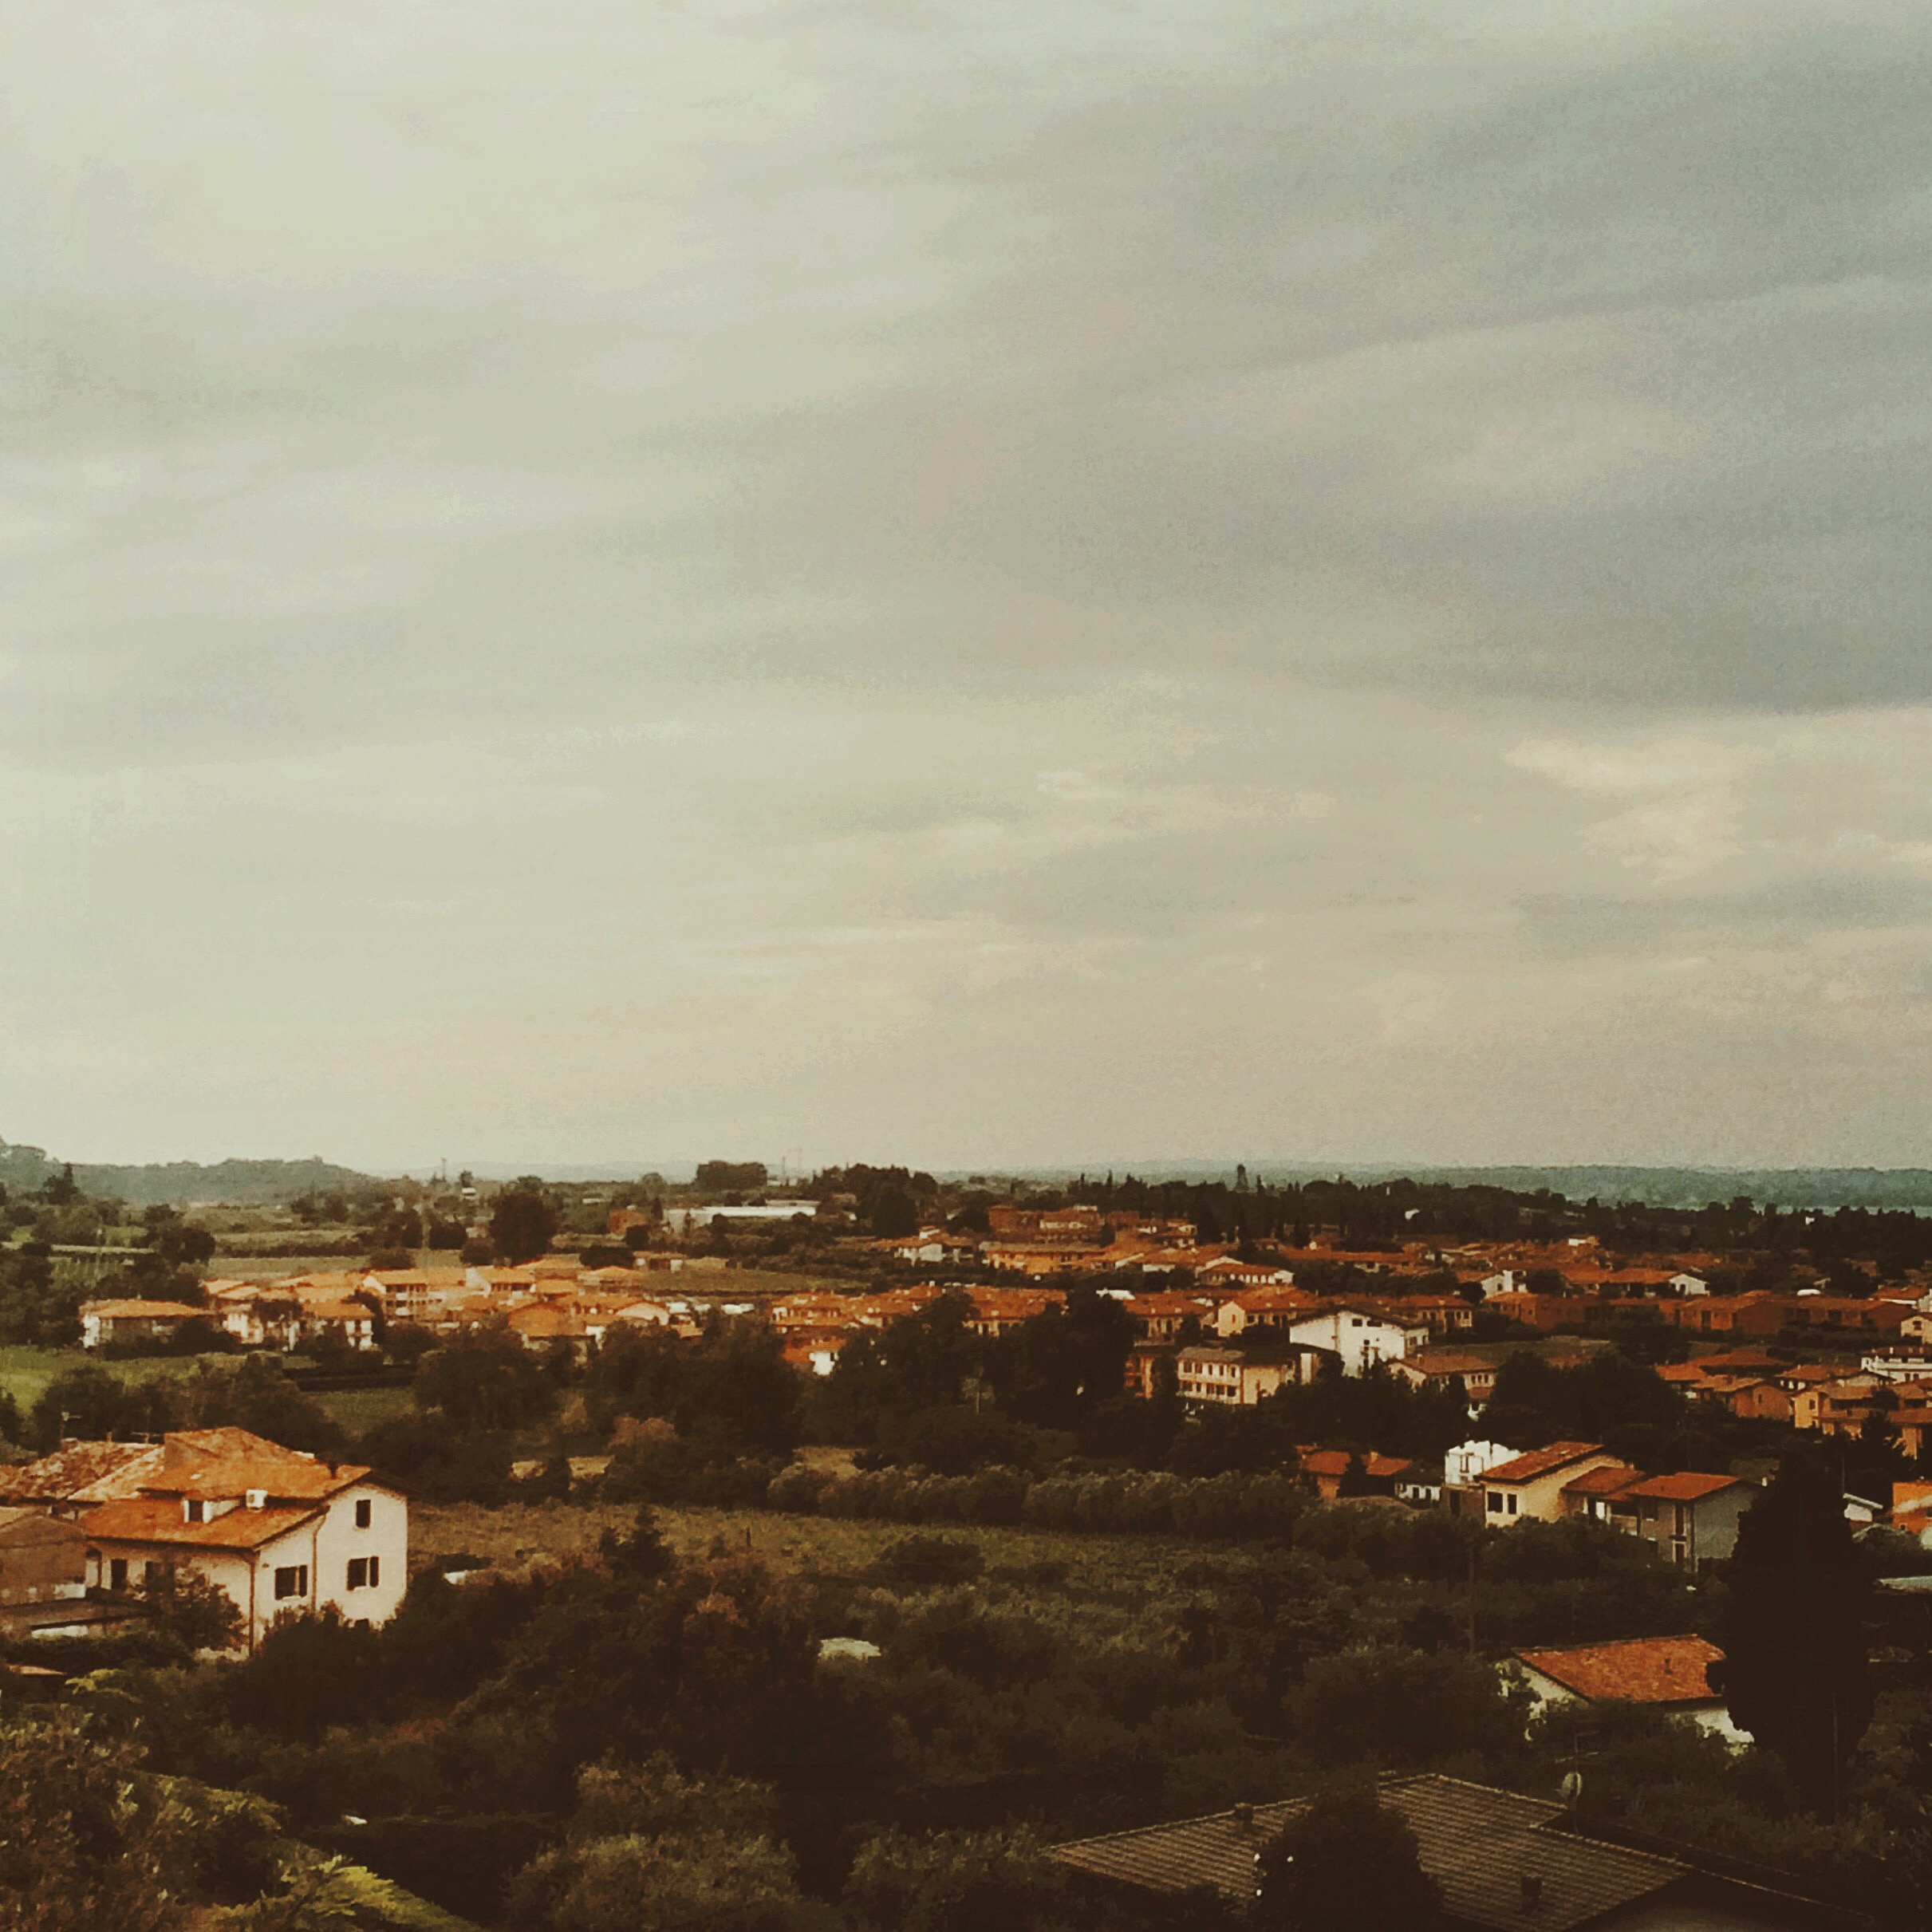 View over Lazise; Lake Garda; Italy; iPhone5s snapshot, mobile photography, edited with mextures & afterlight